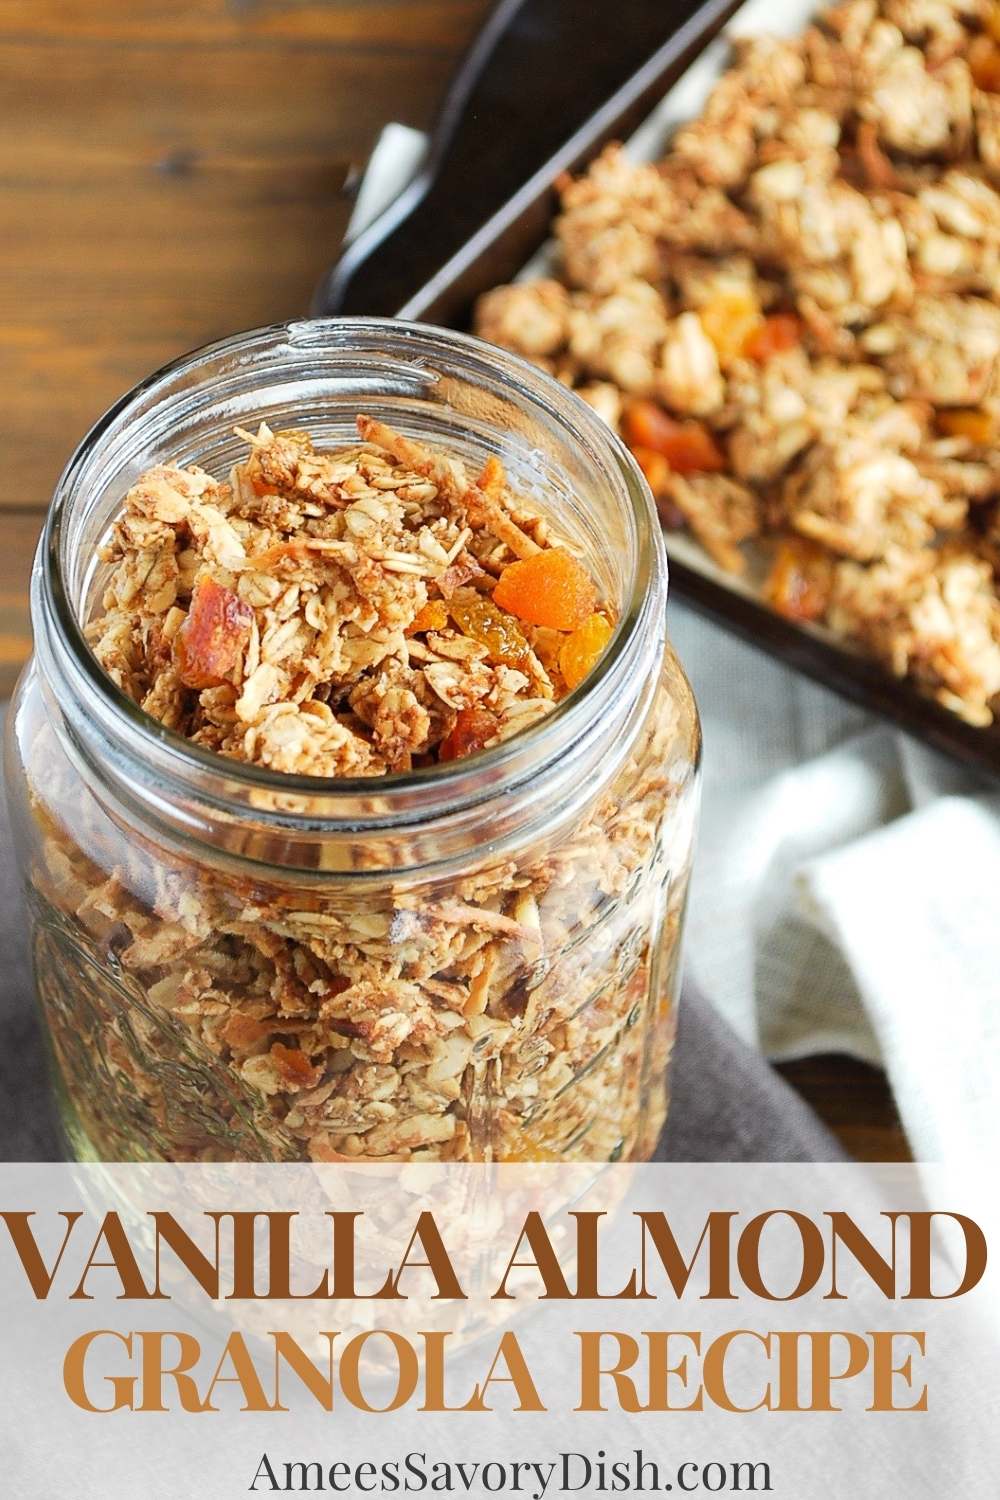 This homemade Vanilla Almond Granola is quick, easy, and delicious. Vanilla-flavored oats, almonds, coconut, apricots, and raisins baked into the perfect sweet and crunchy snack. Gluten-free option included. via @Ameessavorydish